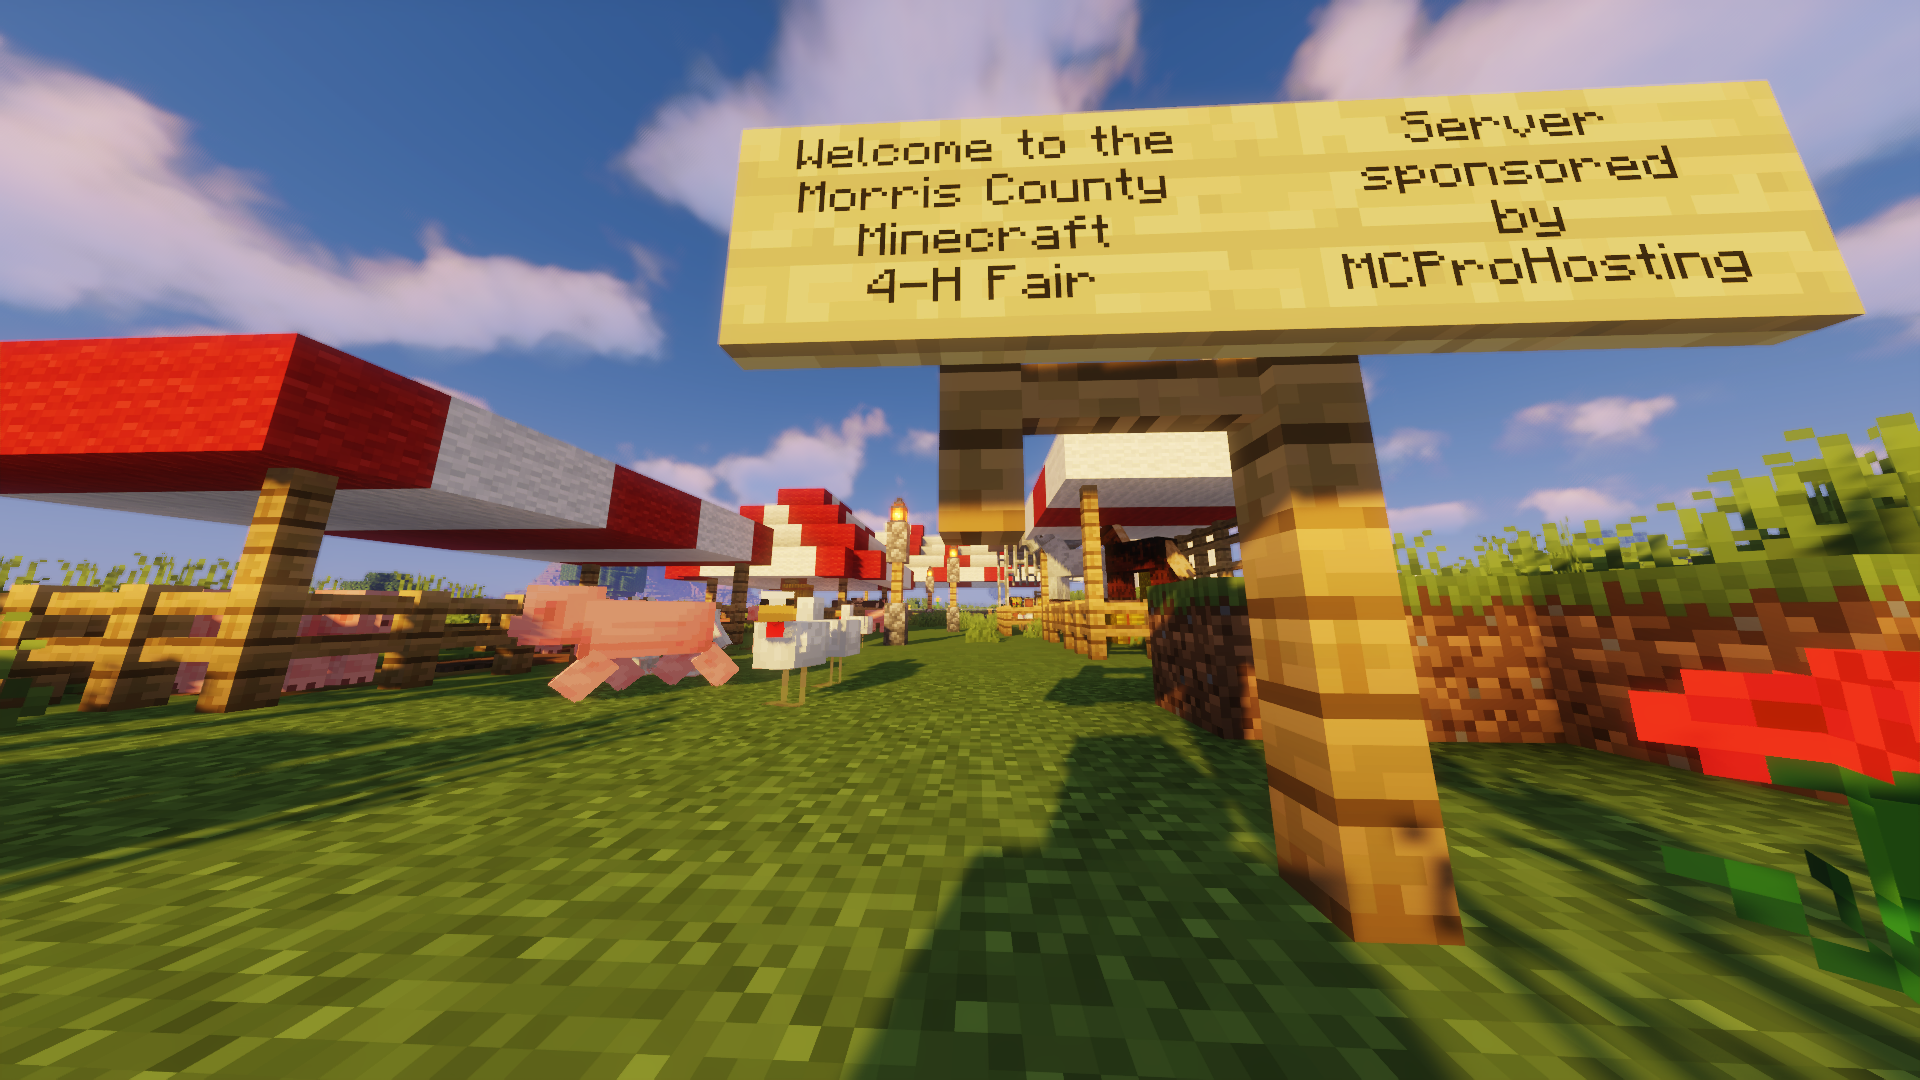 Minecraft Brings 2020 Fair to Life - National Association of Extension 4-H  Youth Development Professionals